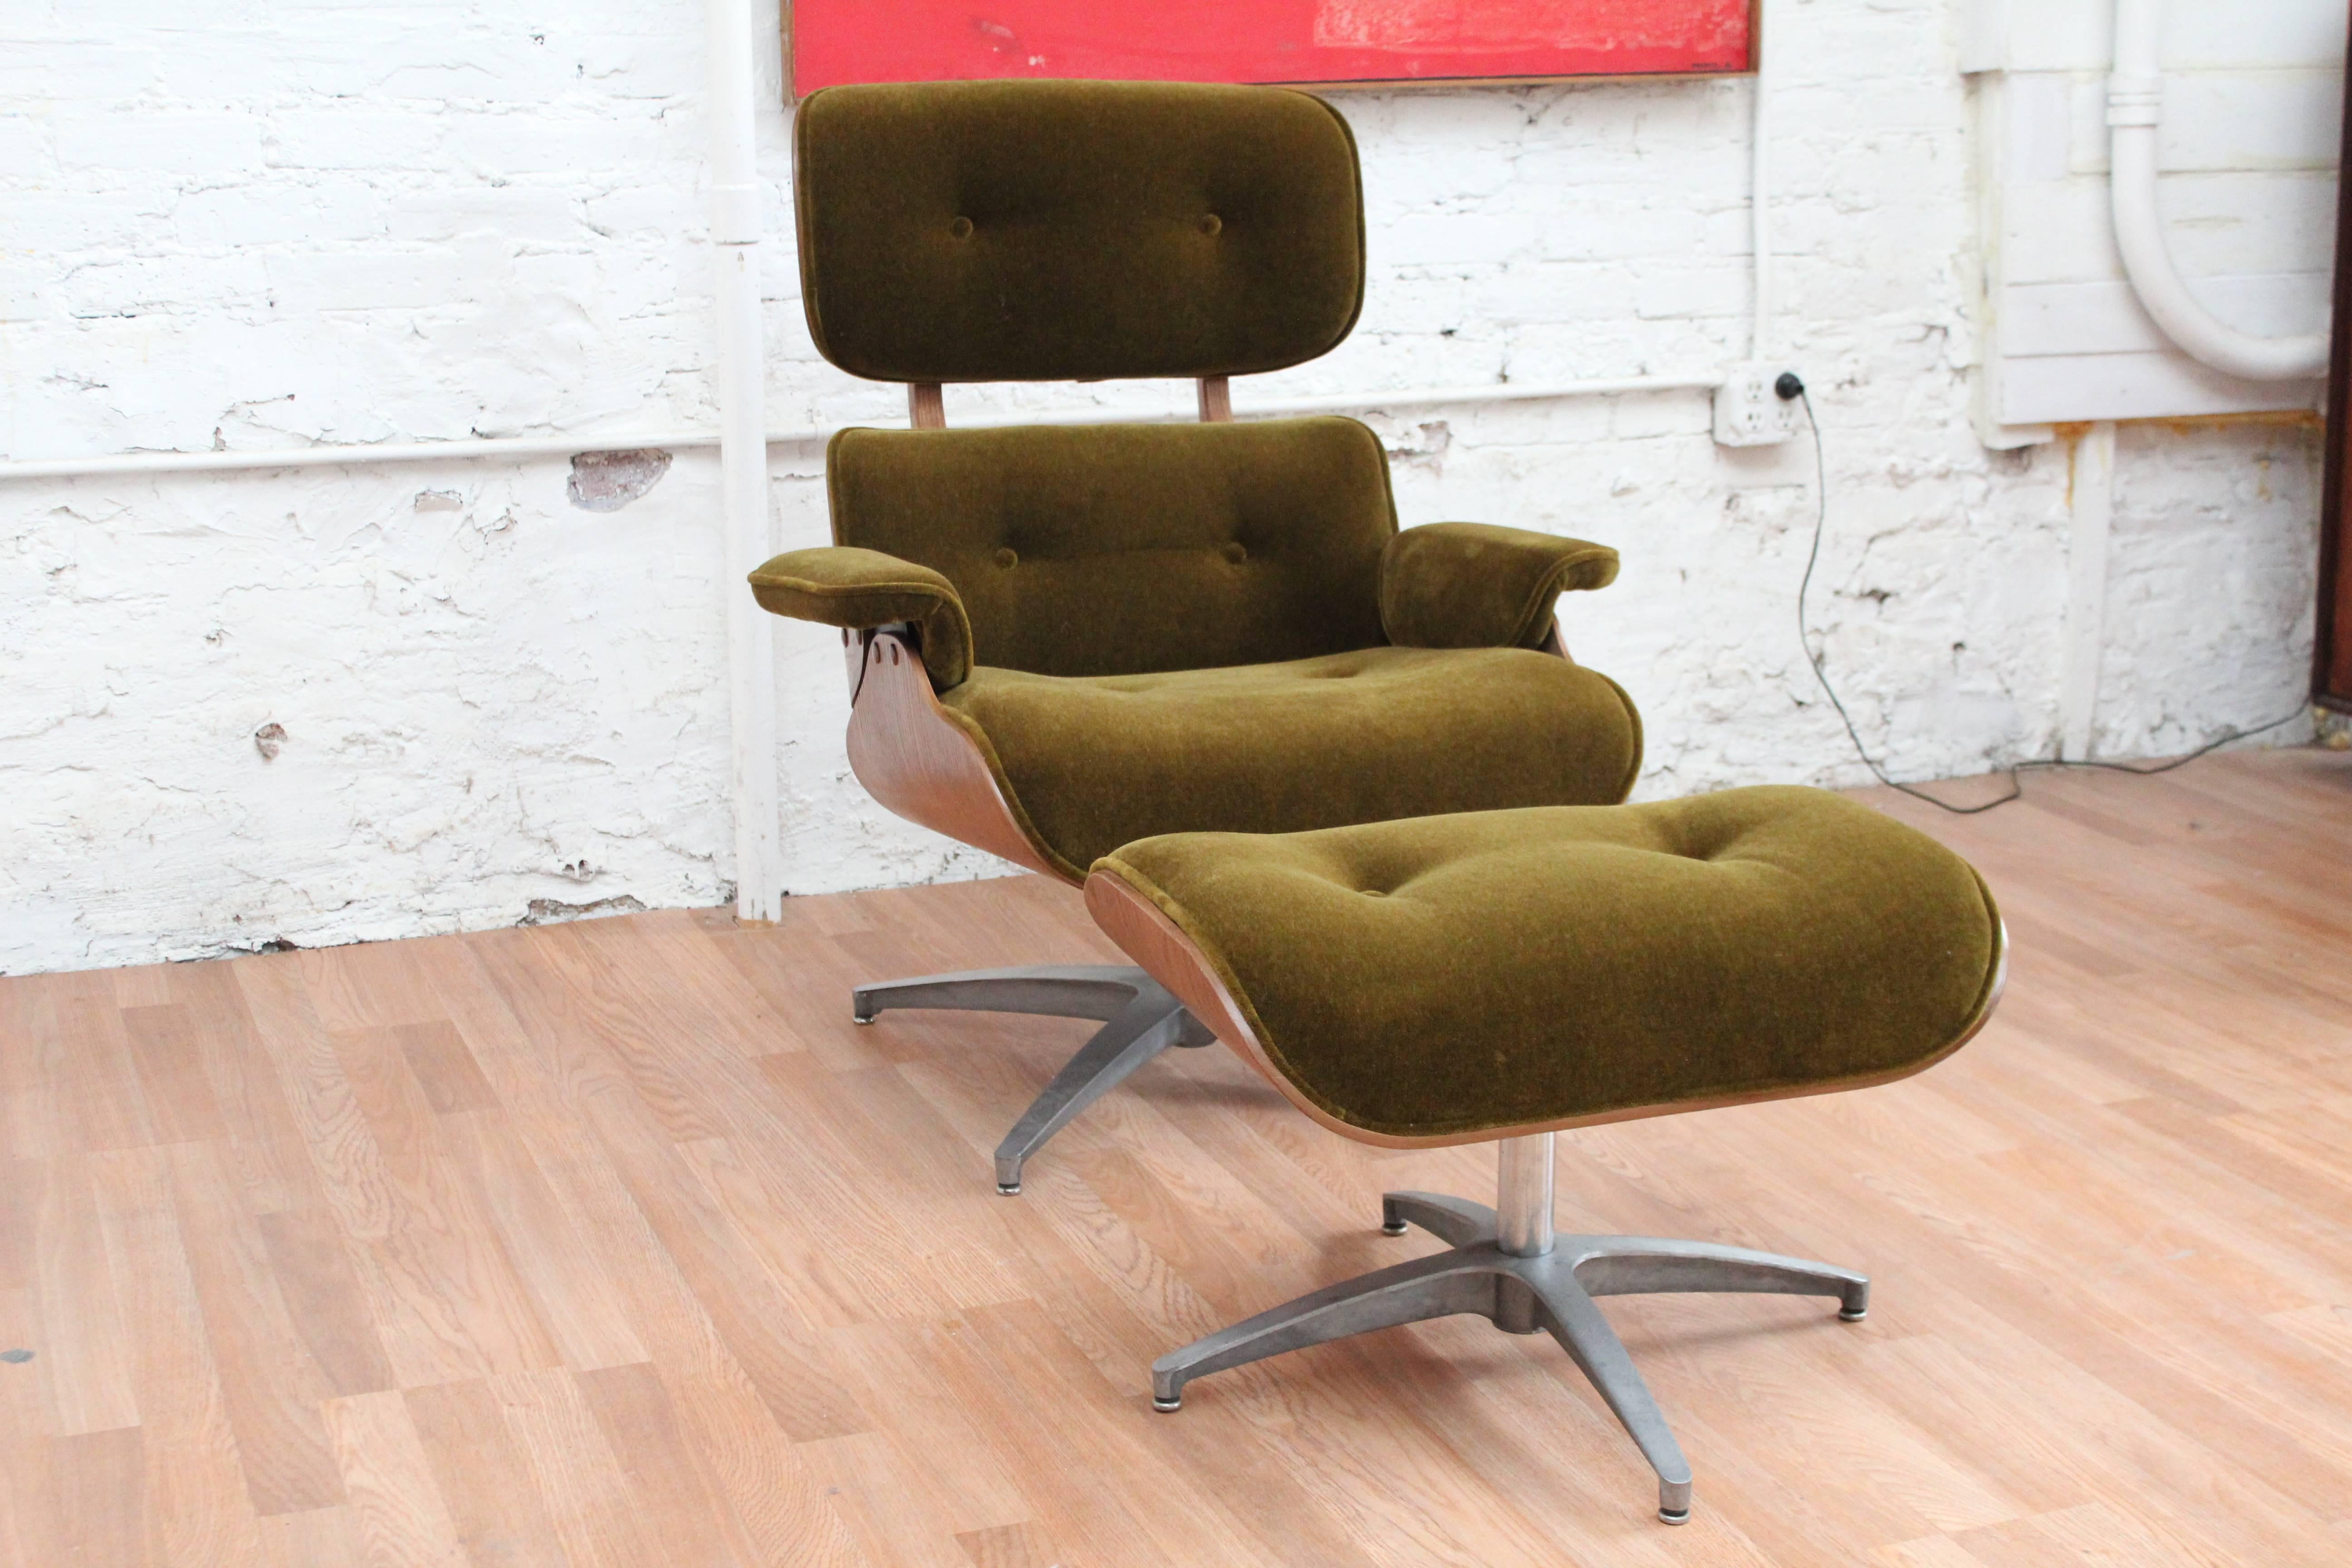 Eames style lounge chair and ottoman by the Charlton Company. This vintage chair features a bent walnut plywood back and is newly and fully upholstered in a sumptuous green mohair, just to give it an extra joosh! What do think about the button tuft?